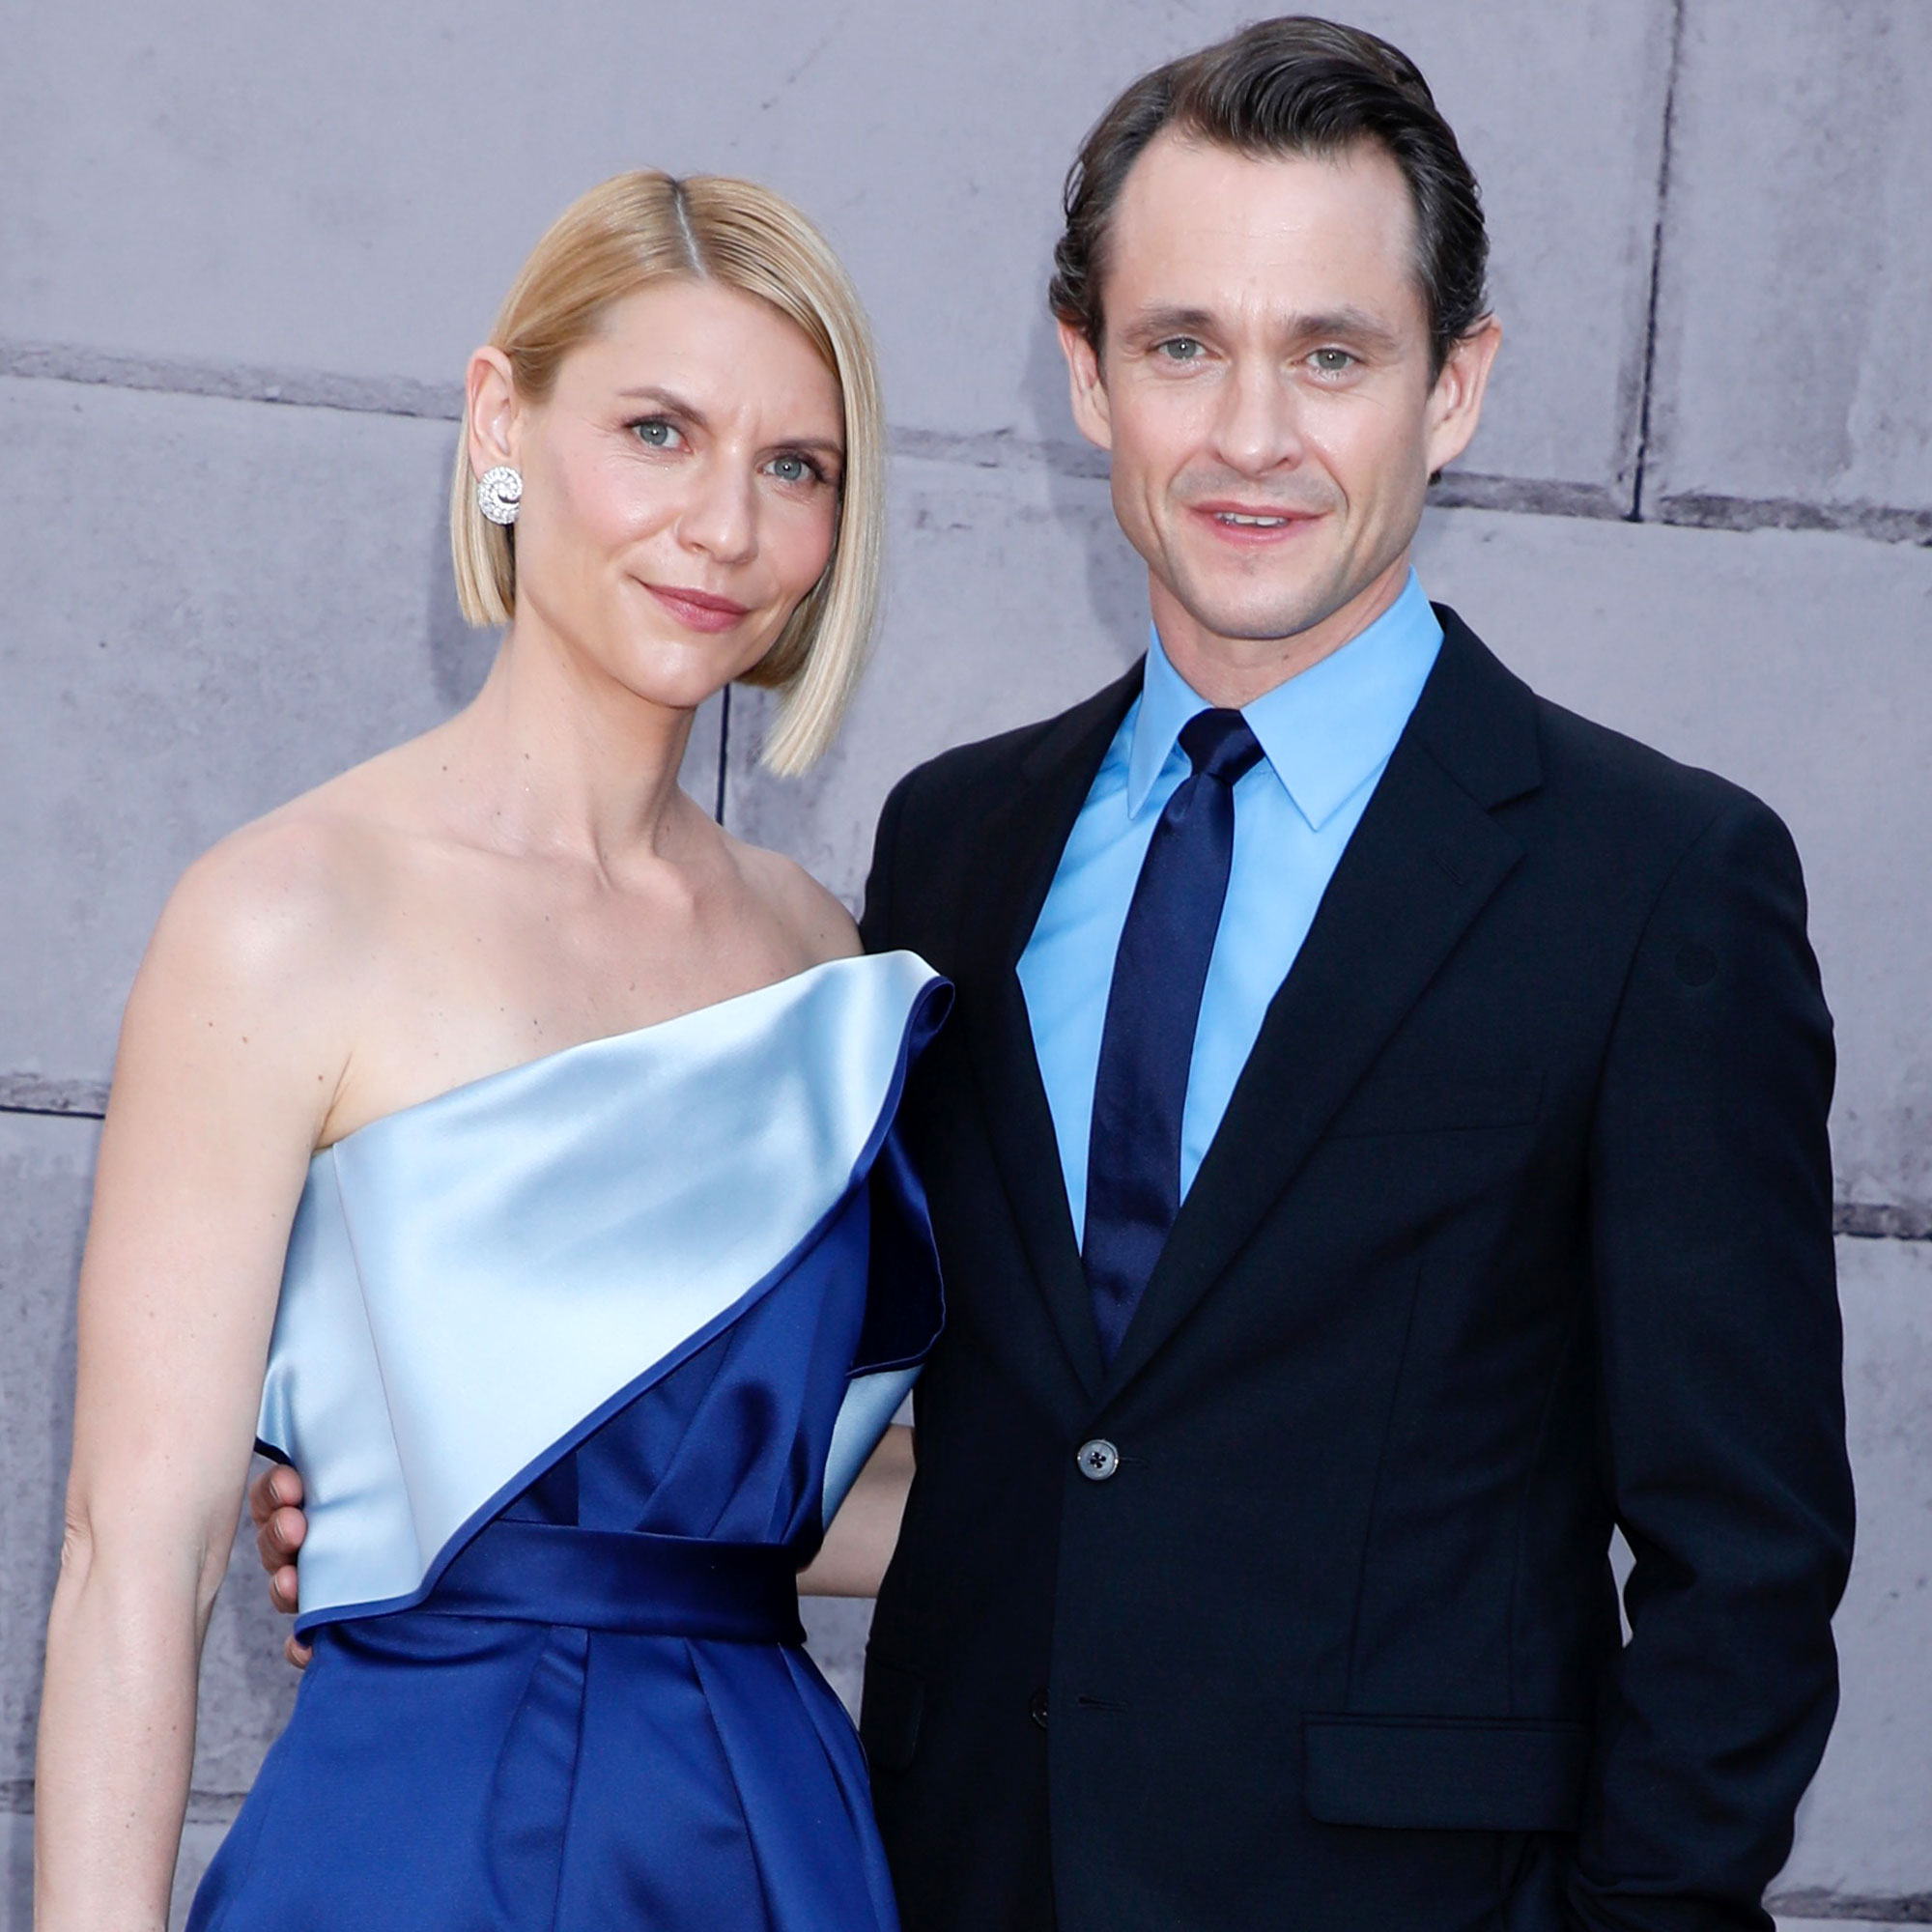 Claire Danes Welcomes Baby No. 3, a Daughter, with Husband Hugh Dancy